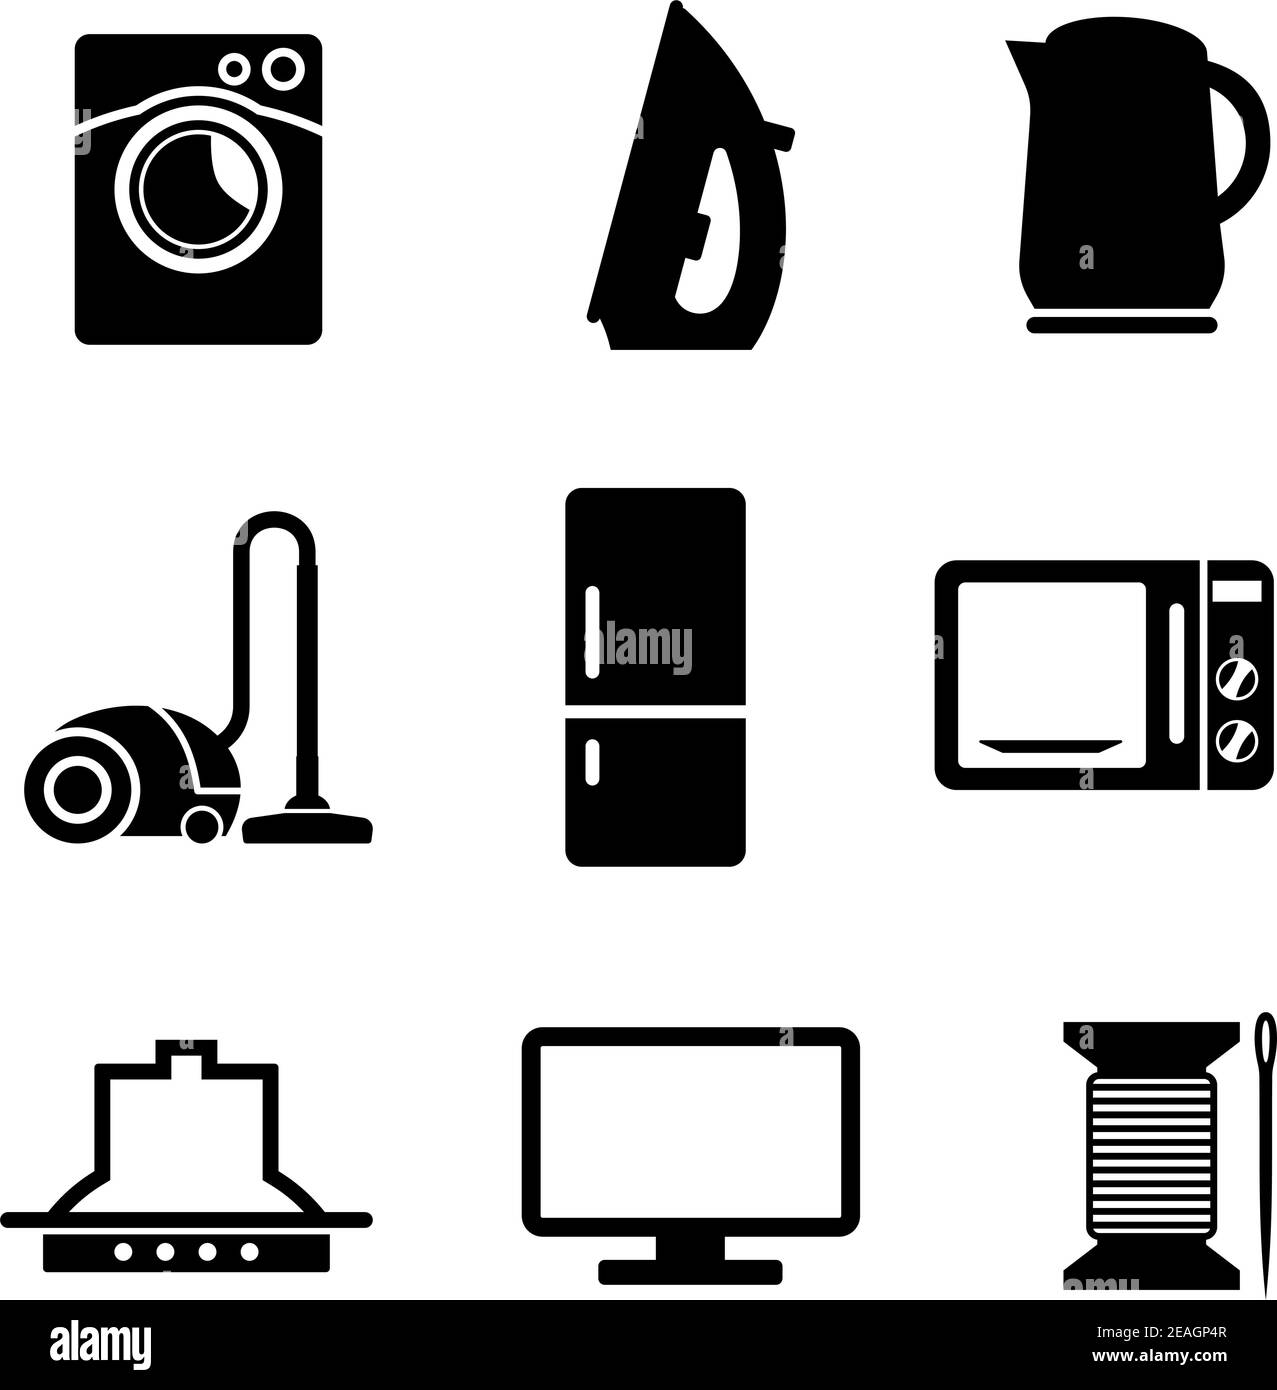 Set of black and white kitchen and home appliances icons including a vacuum cleaner, kettle, iron, fridge, microwave oven needle and cotton, televisio Stock Vector